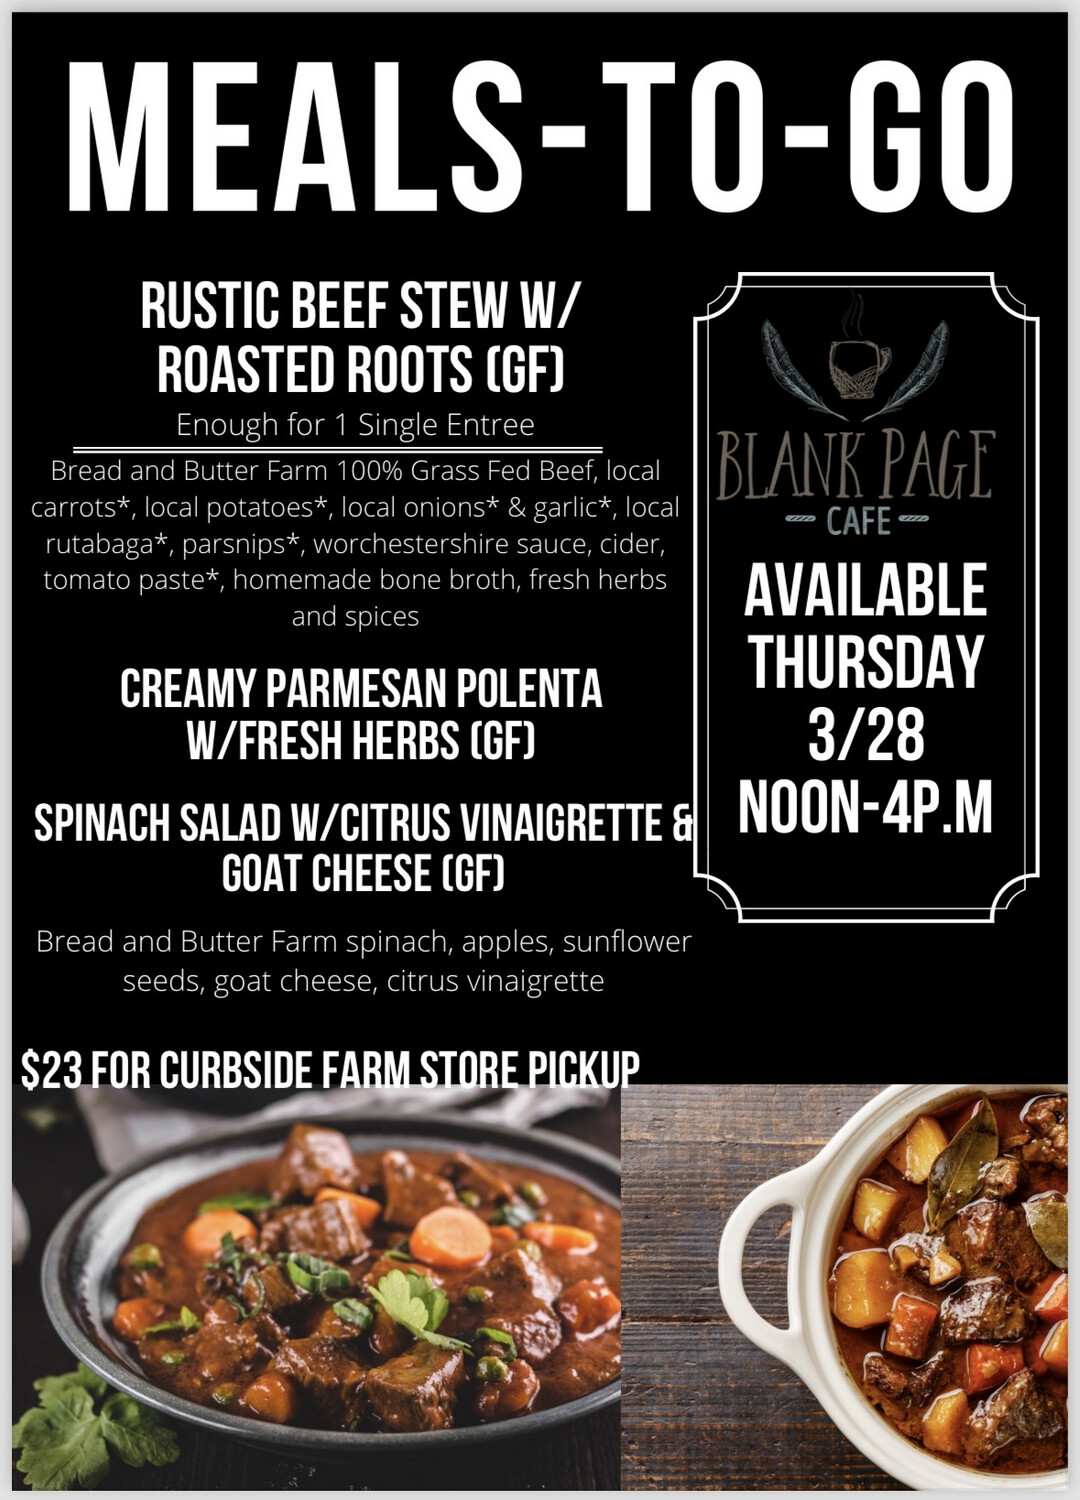 Thursday 3/28 NOON - 4PM PICKUP - Rustic Beef Stew W/Roasted Root Veggies + Creamy Parmesan Polenta W/Herbs + Spinach Salad W/Citrus Vinaigrette and Goat Cheese